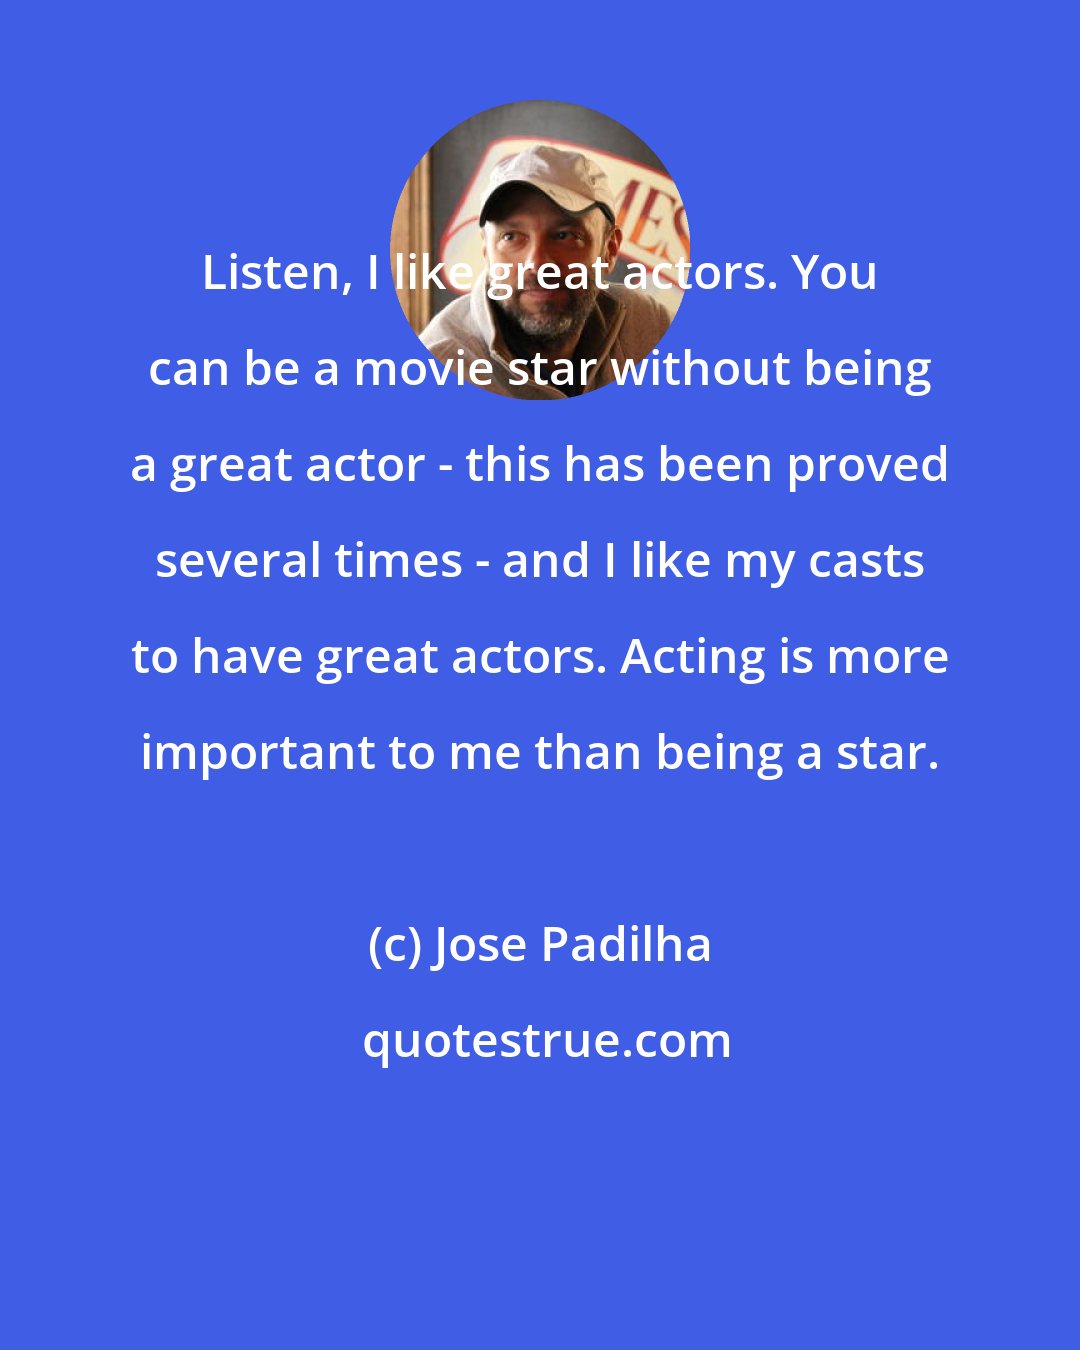 Jose Padilha: Listen, I like great actors. You can be a movie star without being a great actor - this has been proved several times - and I like my casts to have great actors. Acting is more important to me than being a star.